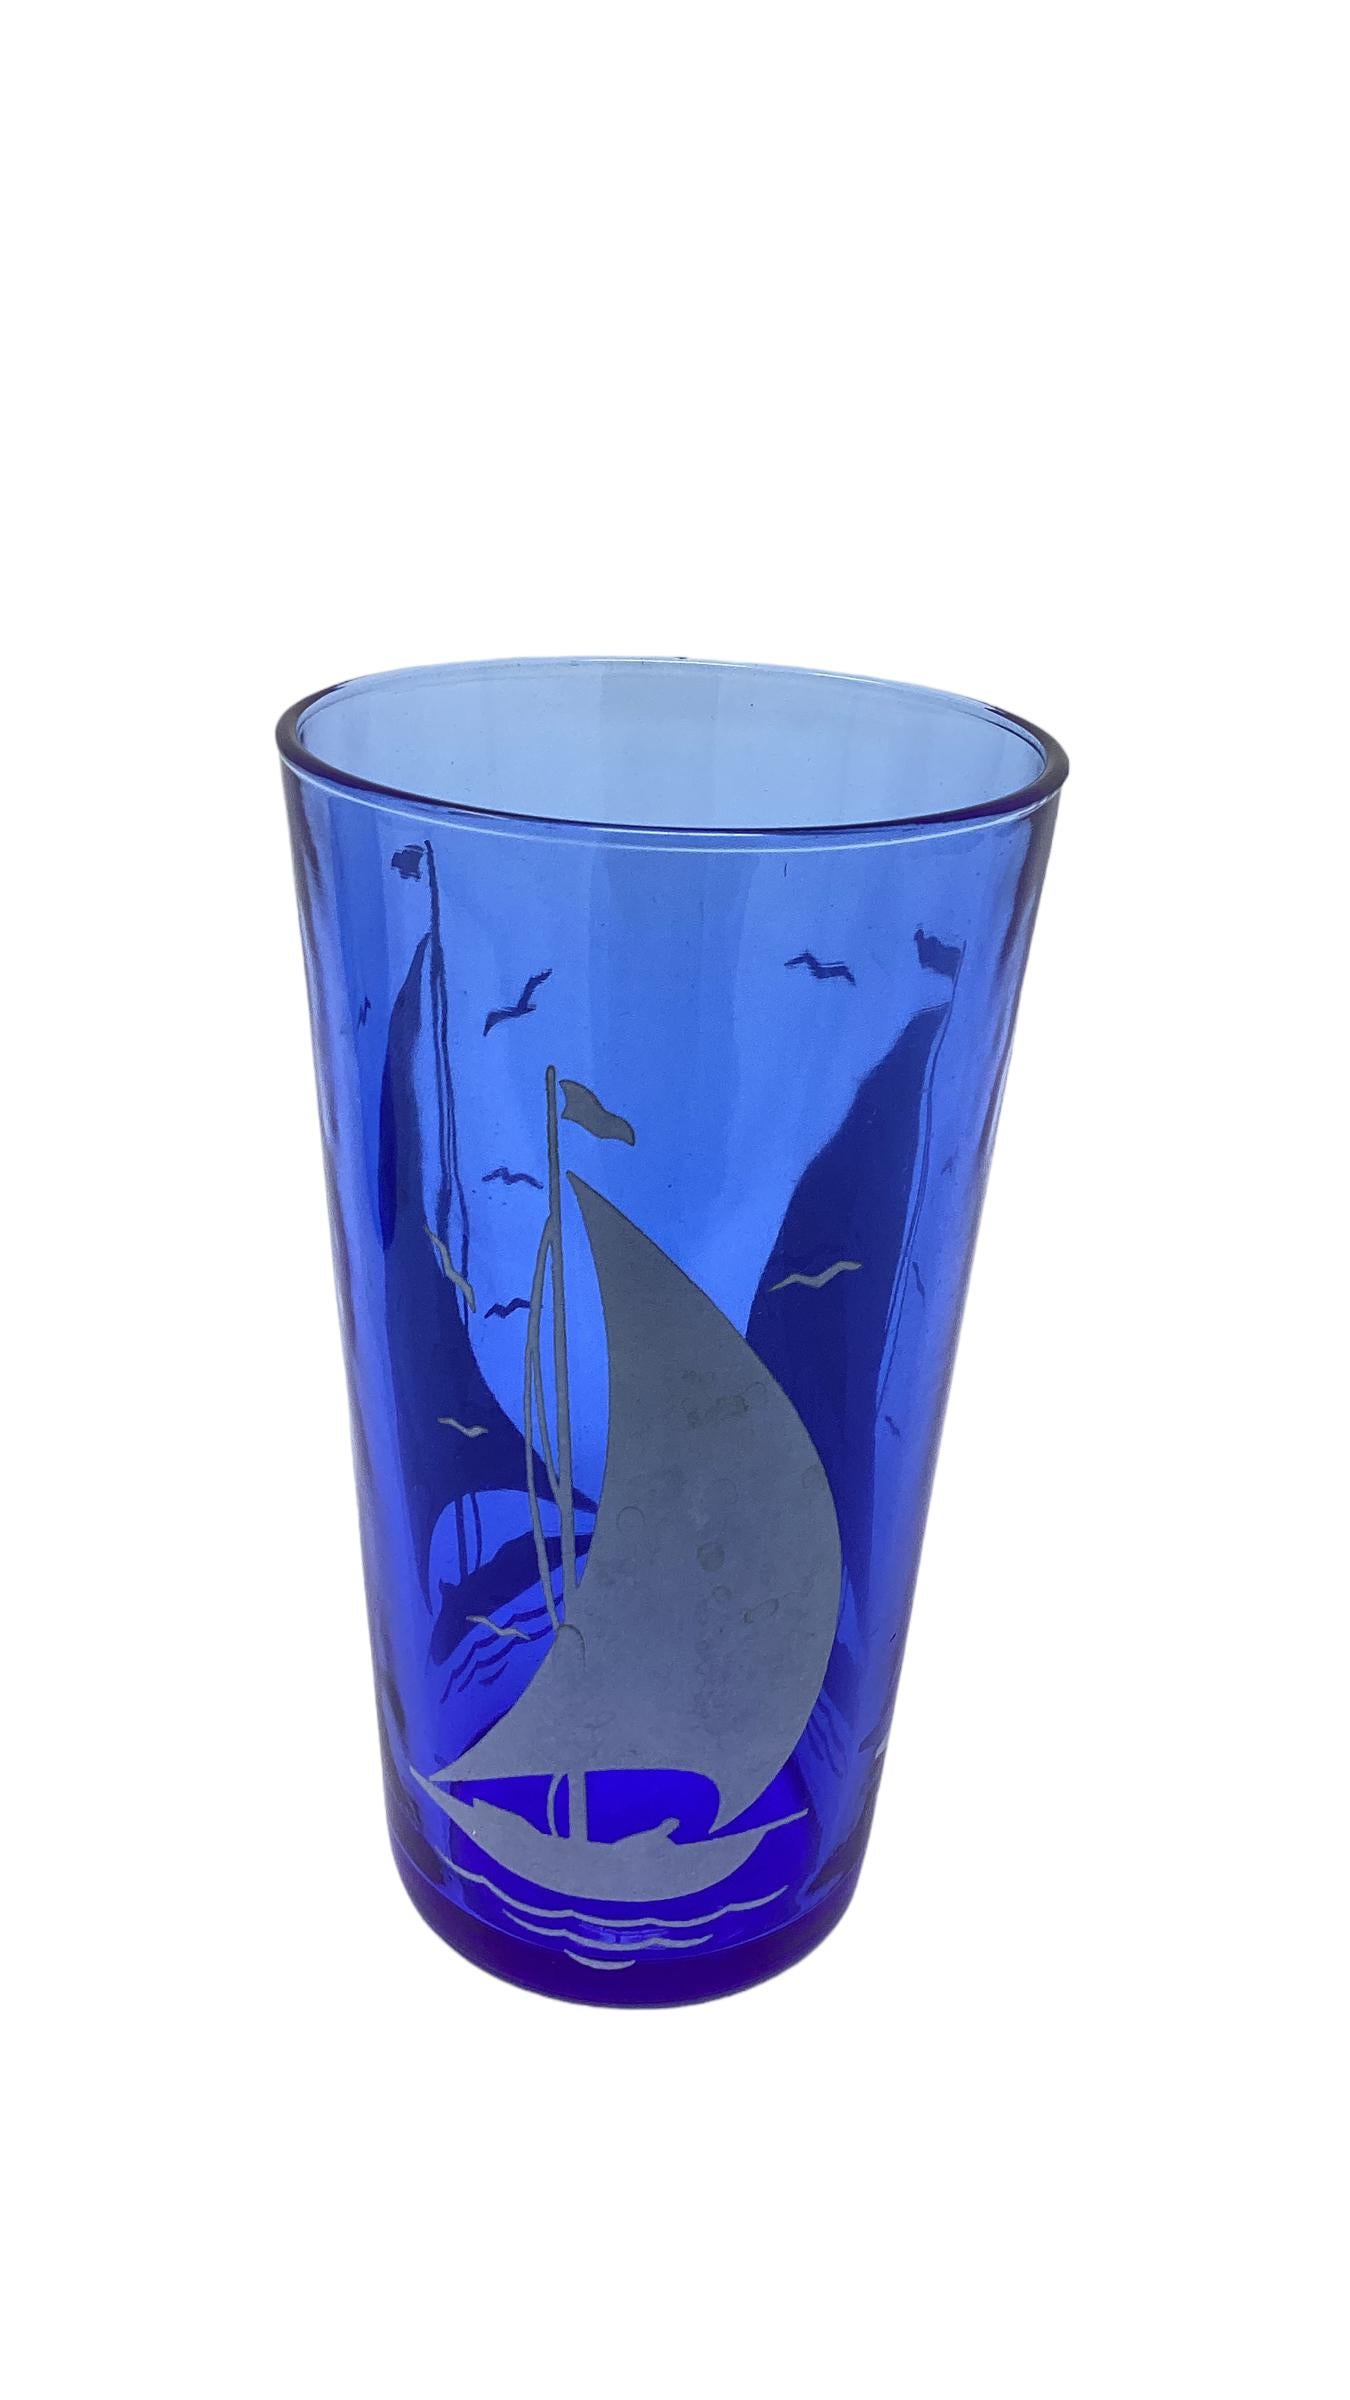 Art Deco cobalt blue glass tumblers with white sailboats from the Sportsman Series by Hazel-Atlas Glassware.